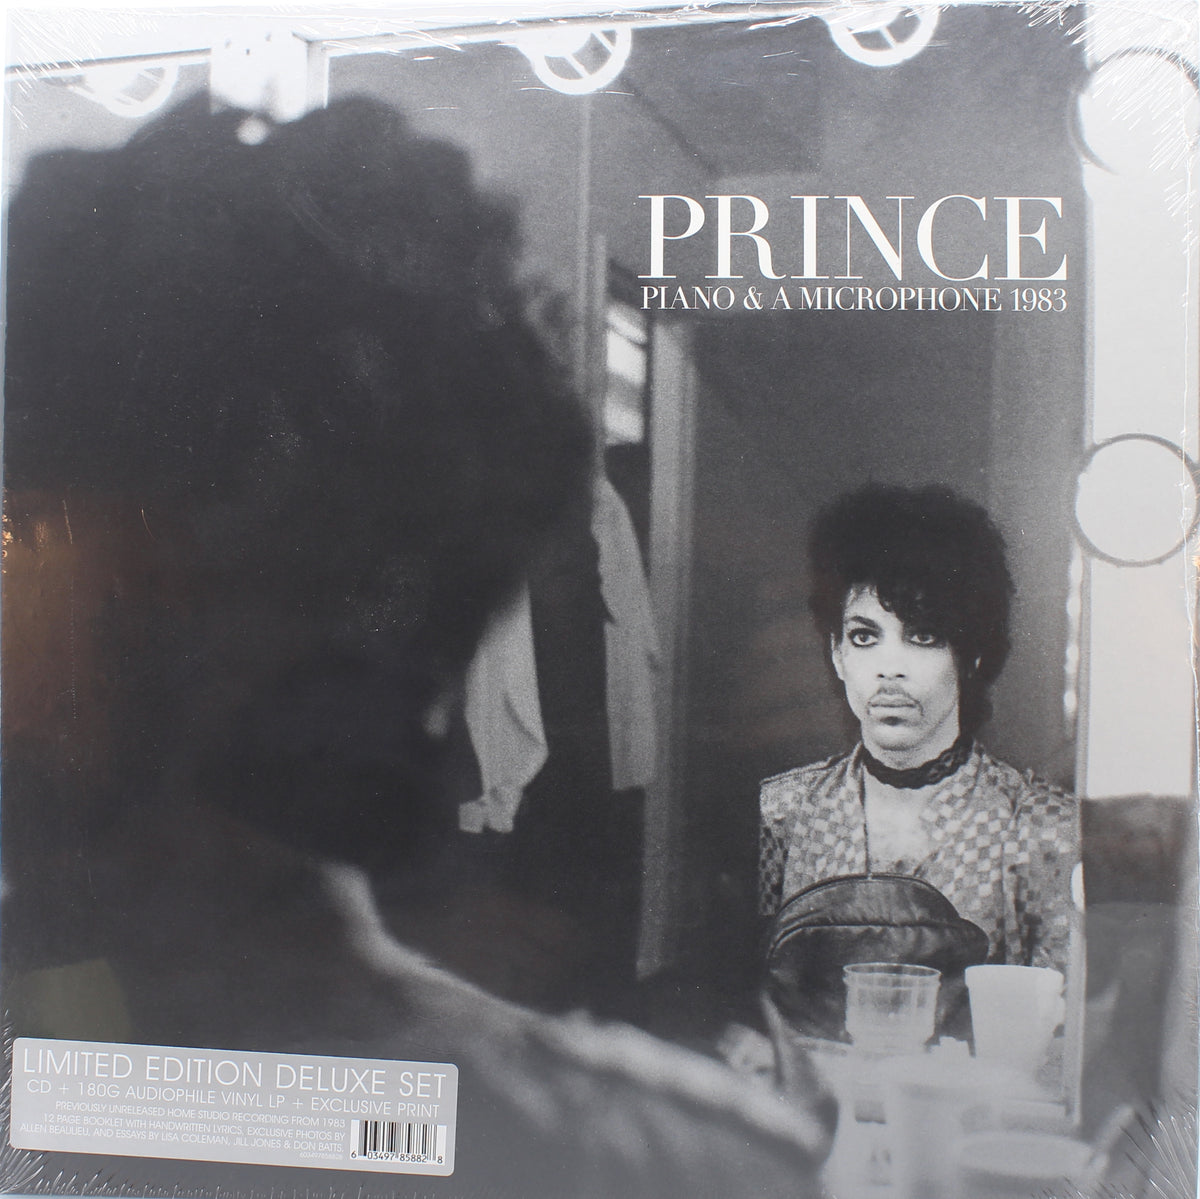 Prince - Piano &amp; Microphone 1983, Box-Set, Deluxe Edition, Limited Edition, Audiophile, USA 2018 (Various diff)